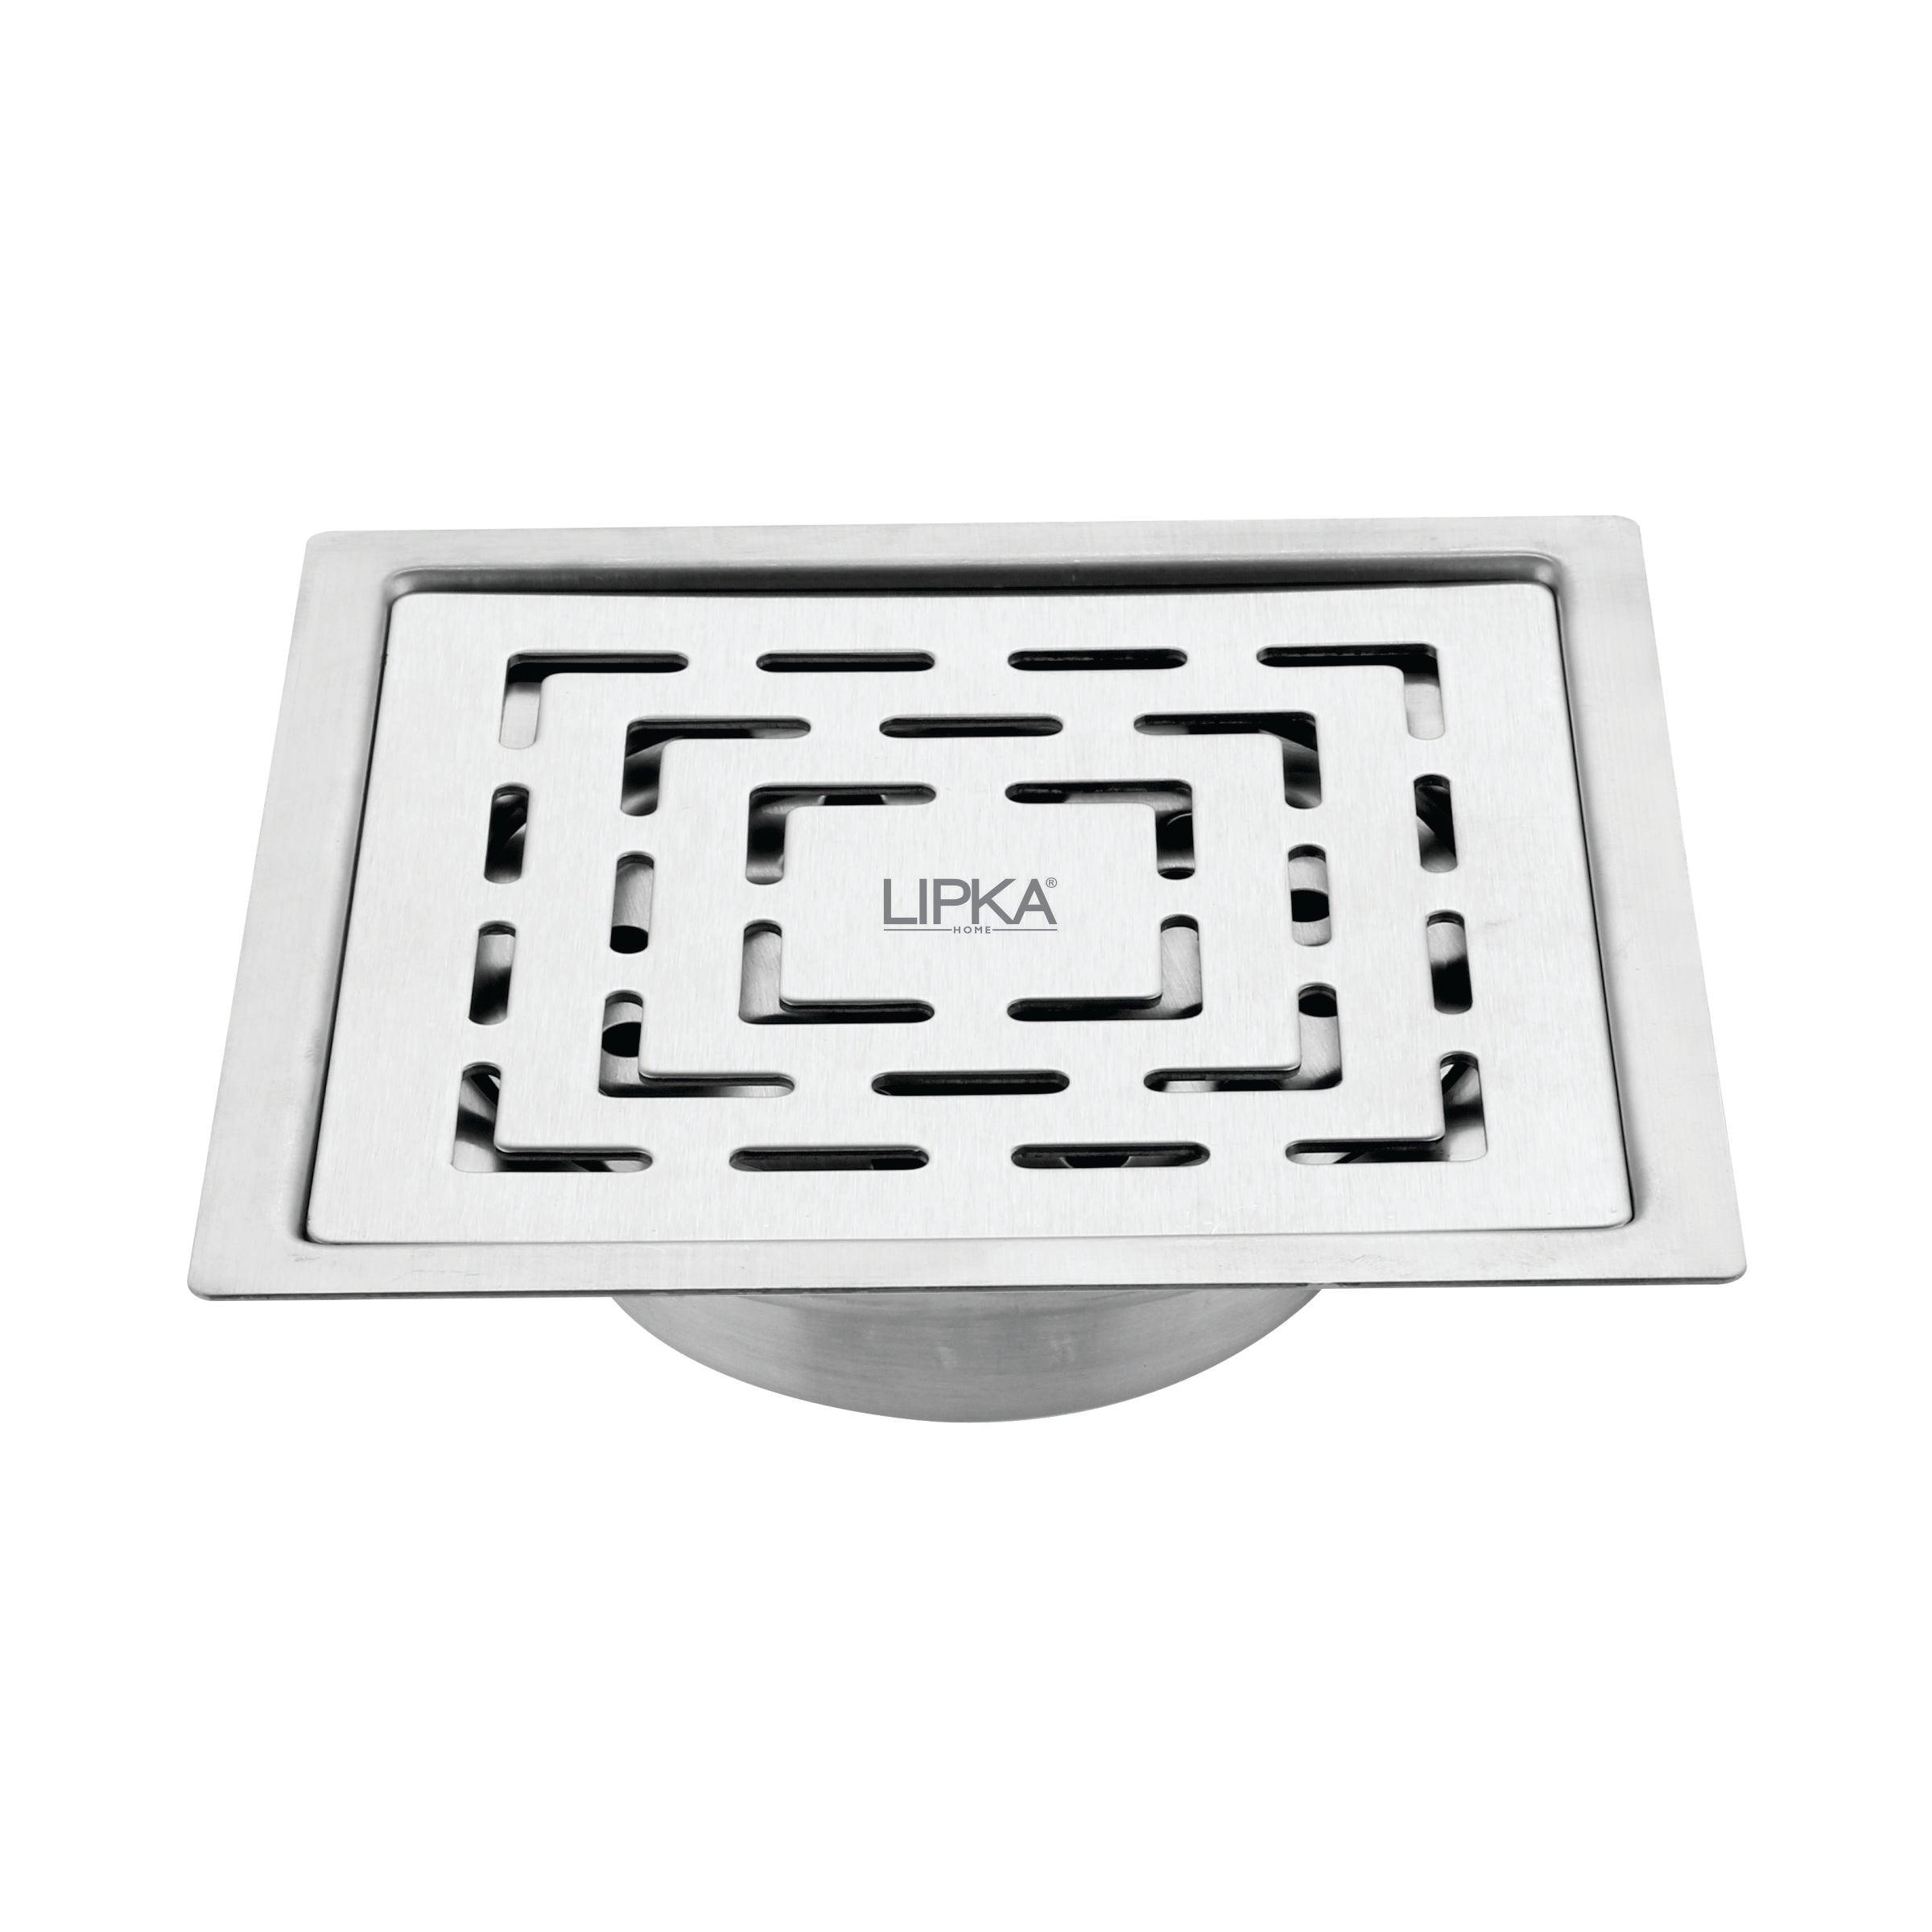 Orange Exclusive Square Flat Cut Floor Drain (5 x 5 Inches) with Cockroach Trap